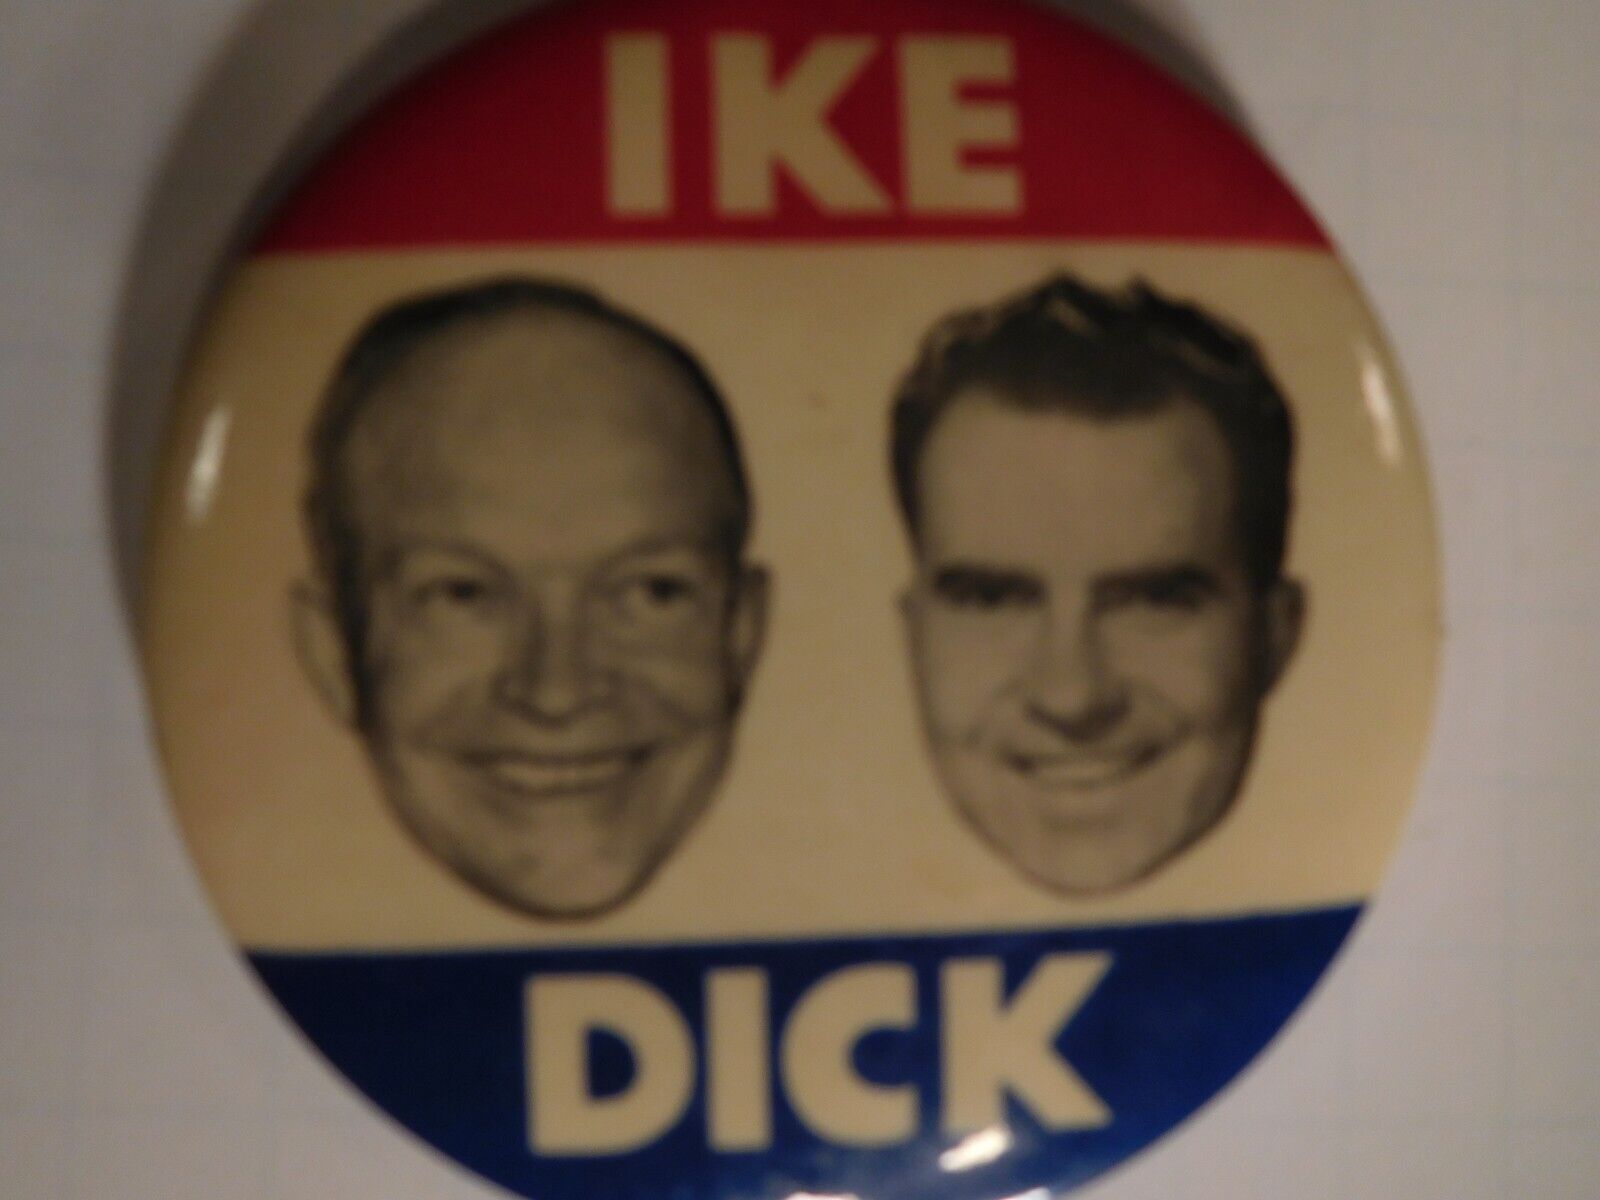 Vintage 1952 Red, White & Blue IKE/DICK 3-1/2 inch Presidential Campaign Button